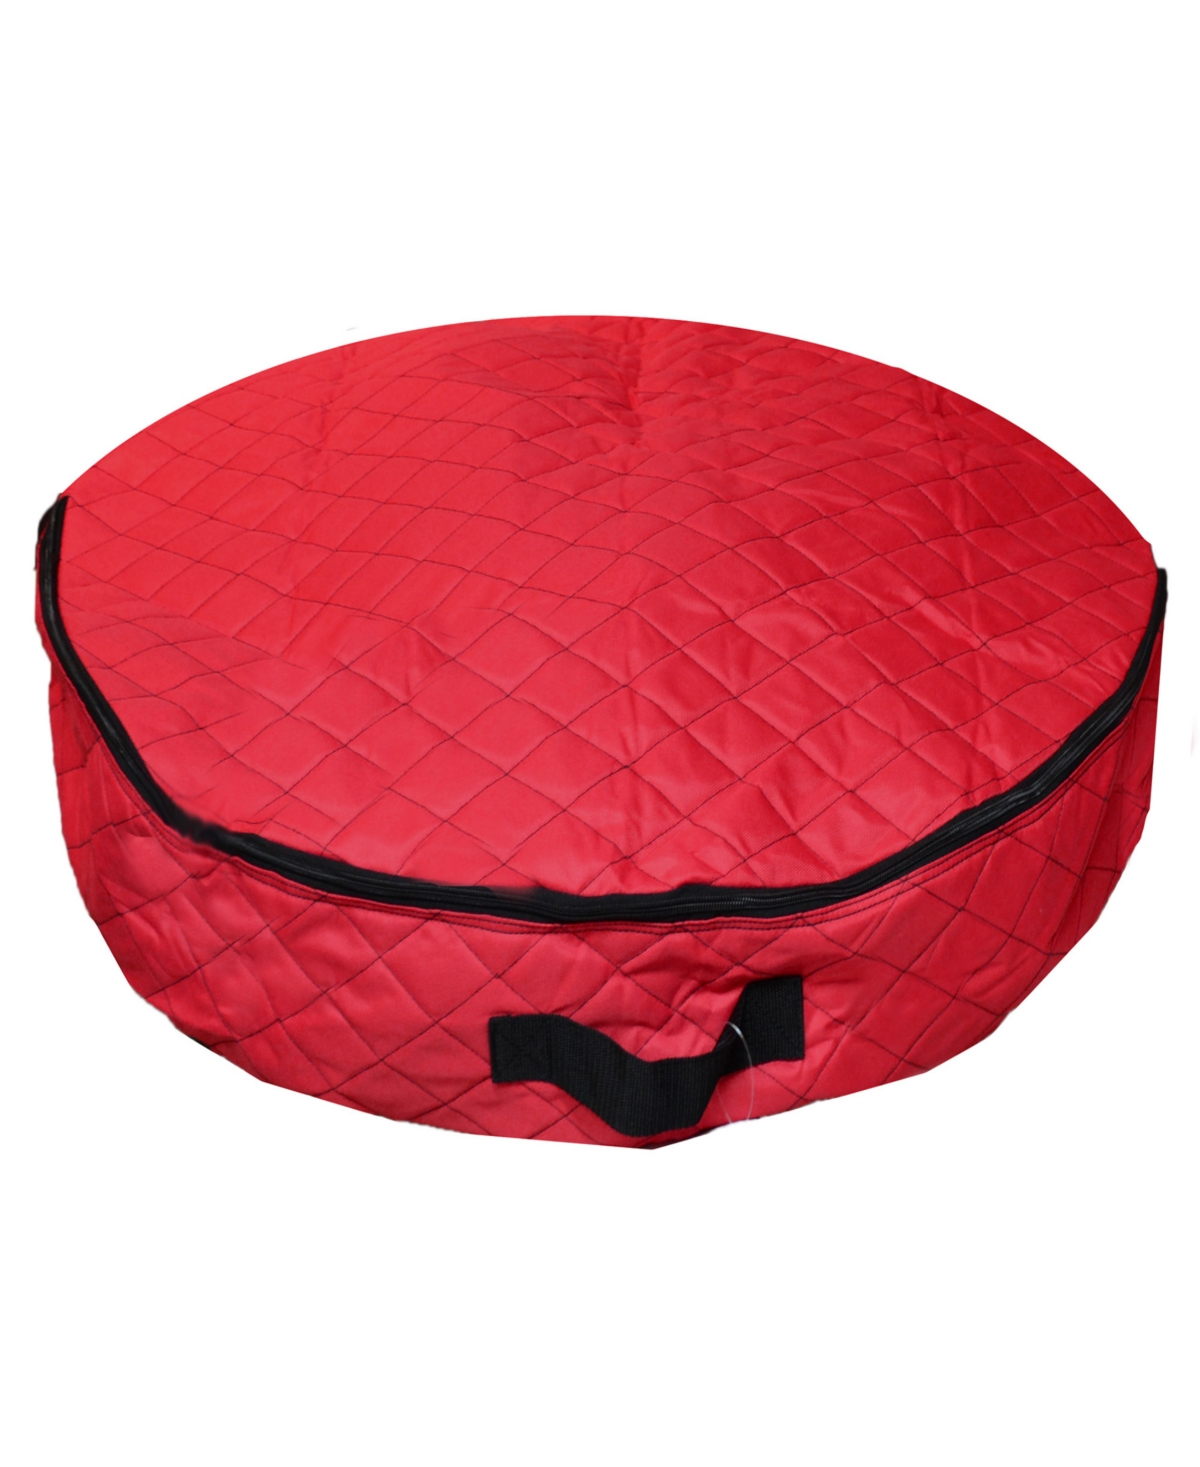 36" Premium Quilted Christmas Wreath Storage Bag - Red